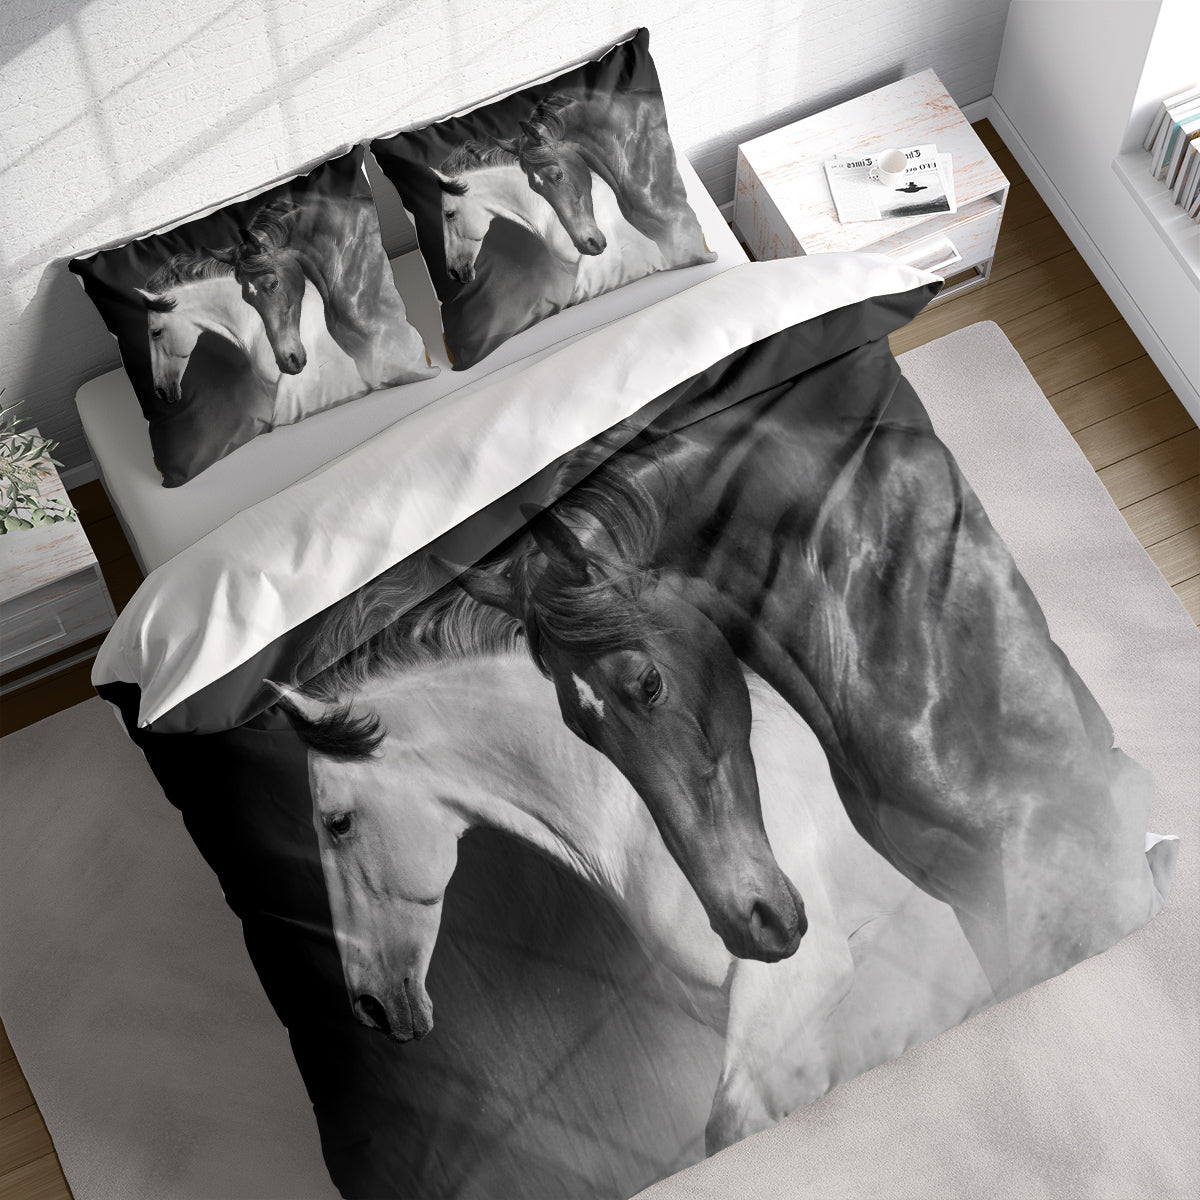 Horses Running Animals Black And White 3D Duvet Cover Set W Pillow Cover, Single Double Queen King Size, Printed Cotton Quilt Doona Cover